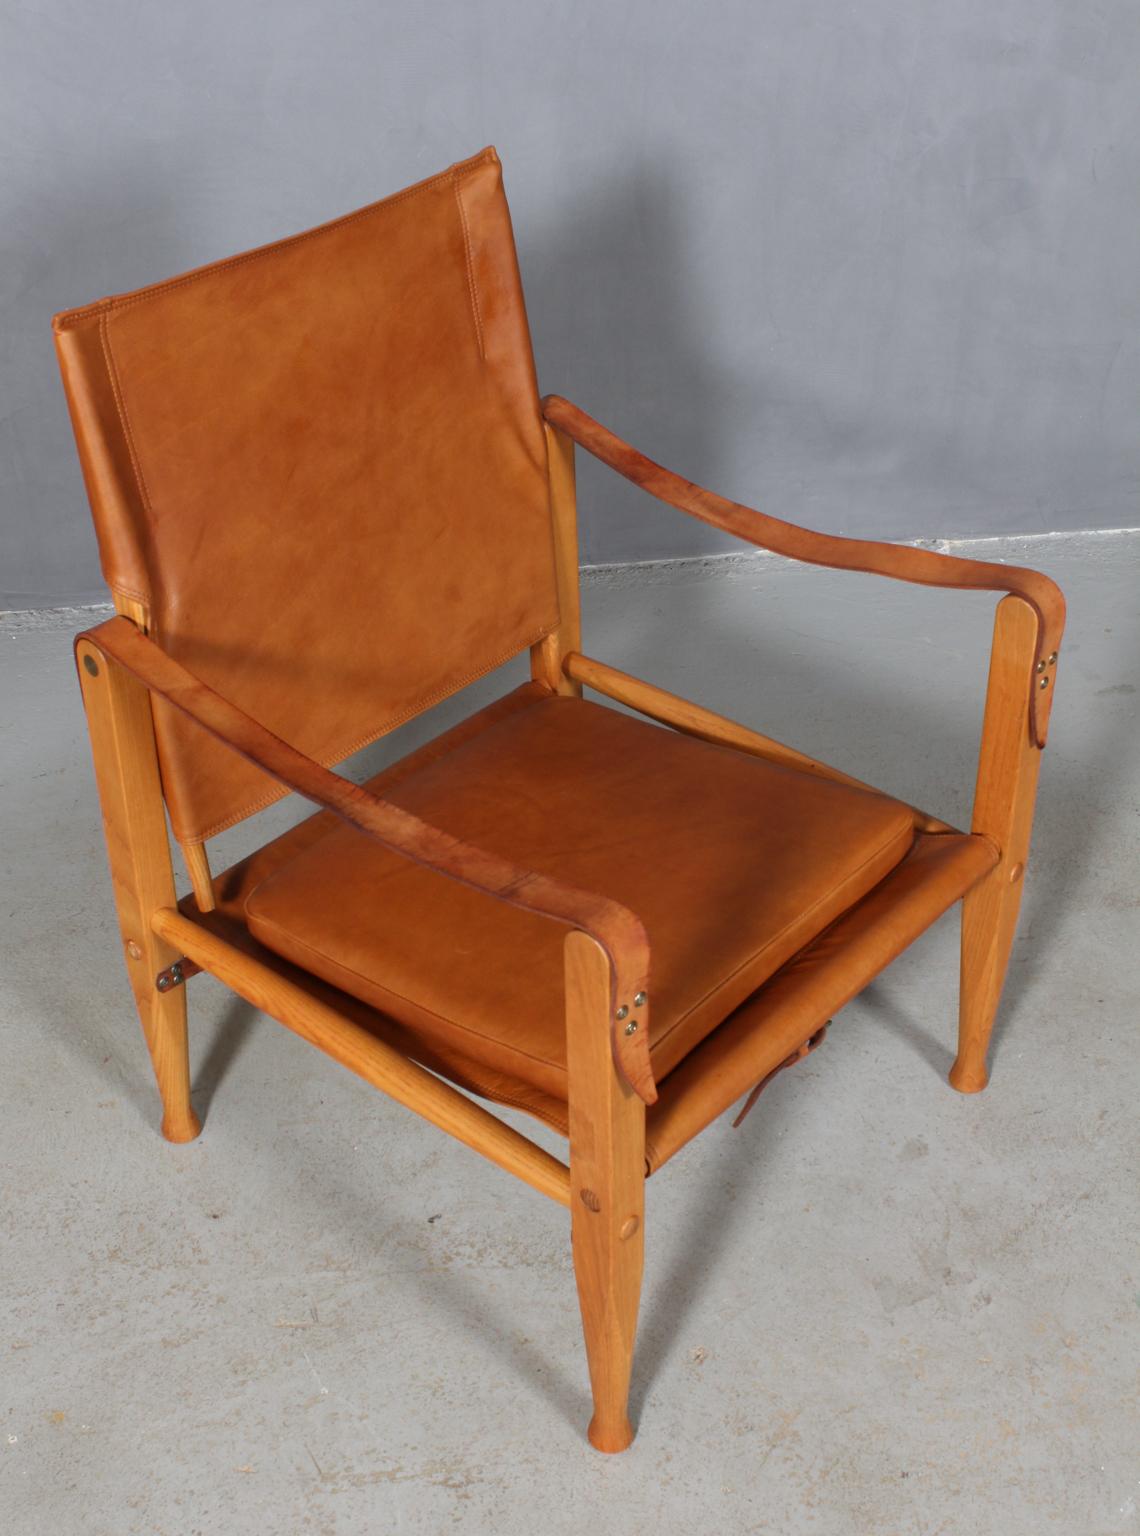 Kaare Klint for Rud Rasmussen. Safari chair new upholstered with Vintage aniline leather. Straps maintained in the original patinated leather.

Frame in solid ash.

Model Safari chair, made by Rud Rasmussen.